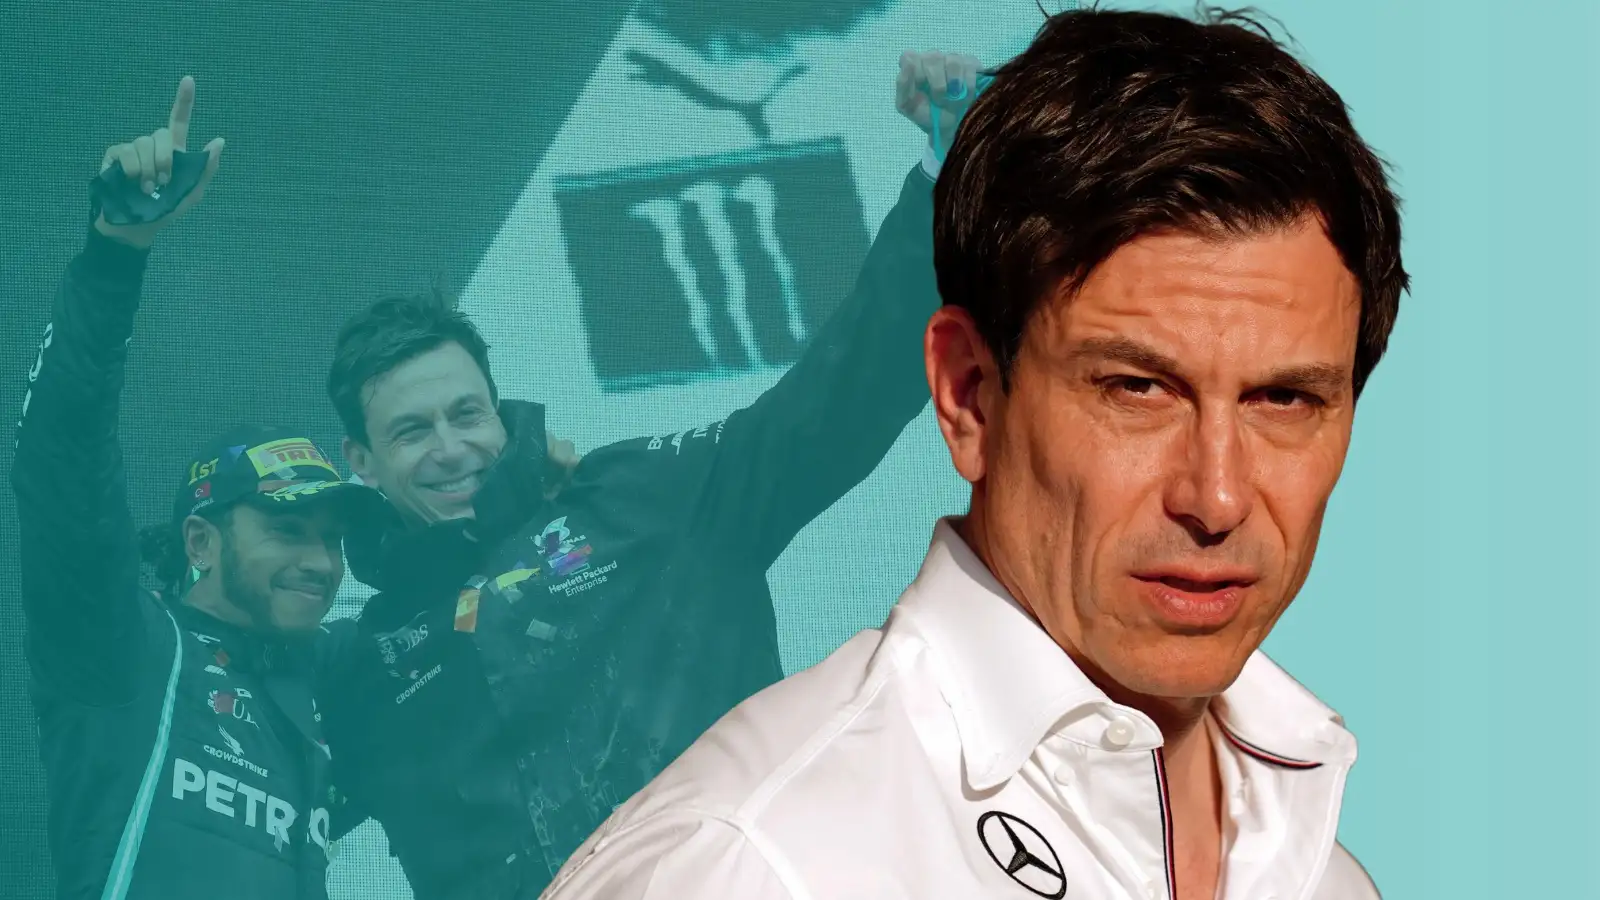 Lewis Hamilton and Toto Wolff.